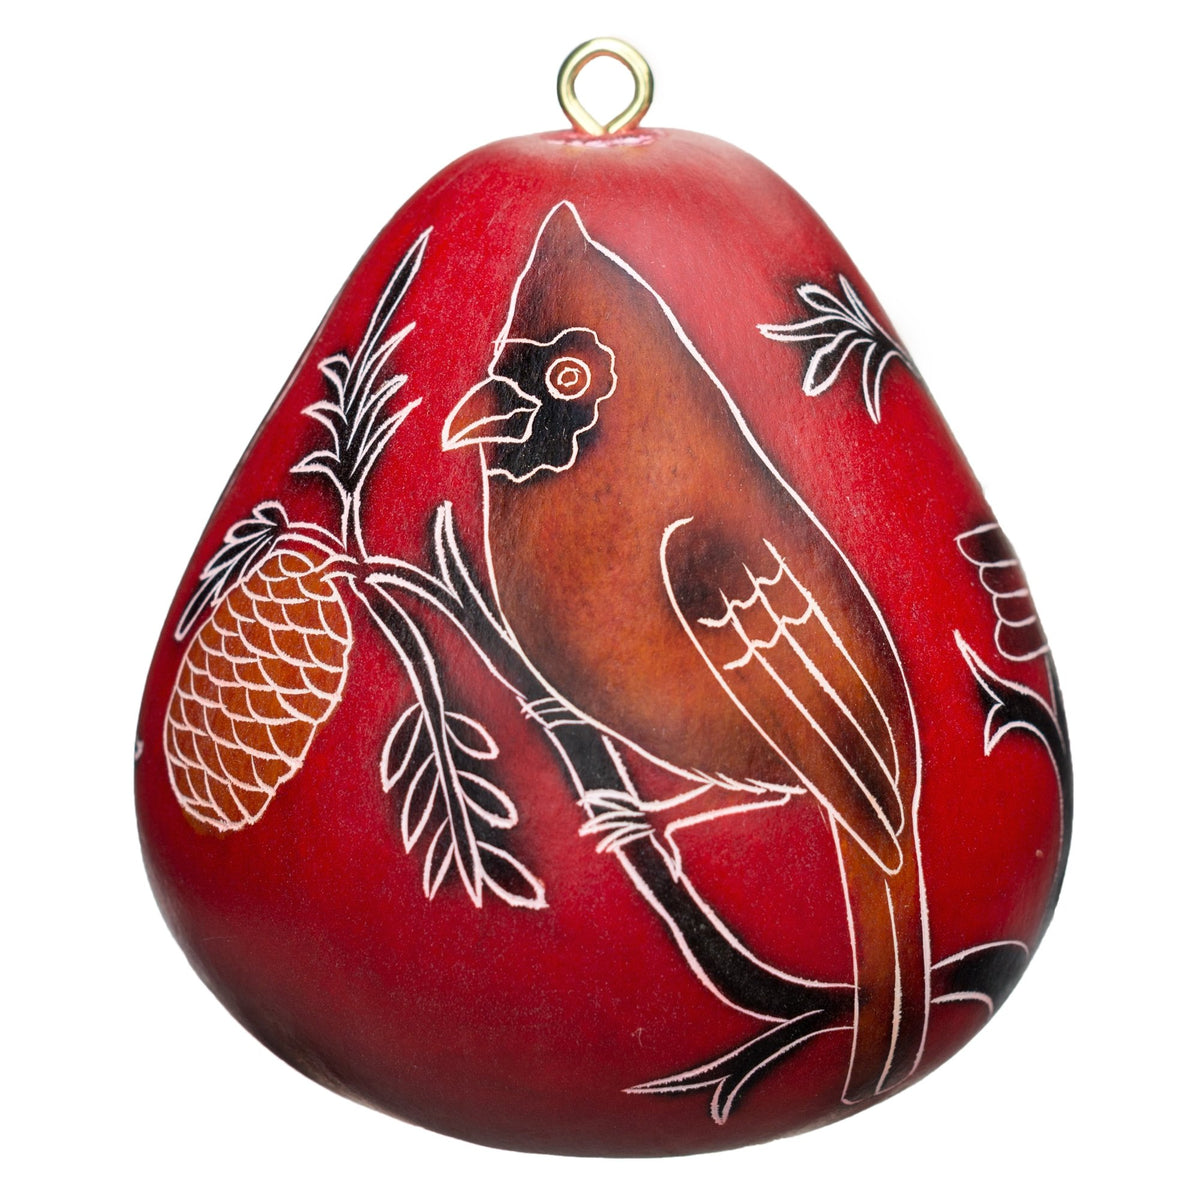 Cardinals on a Branch - Gourd Ornament